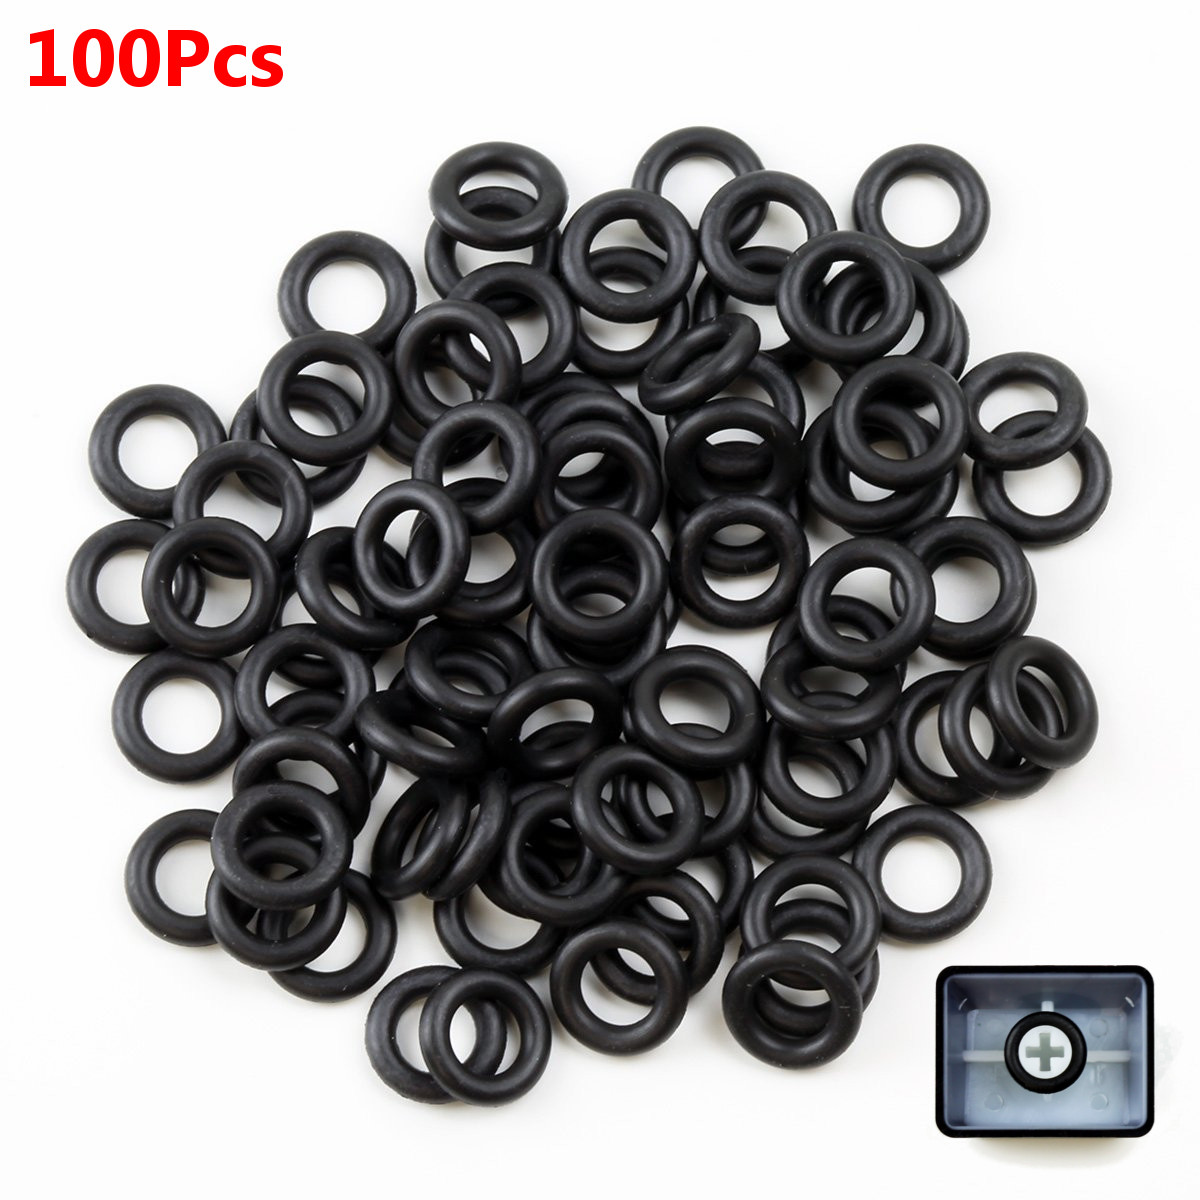 100 Mechanical Keyboard Keycap Rubber O-Ring Switch Dampeners for Cherry MX 6